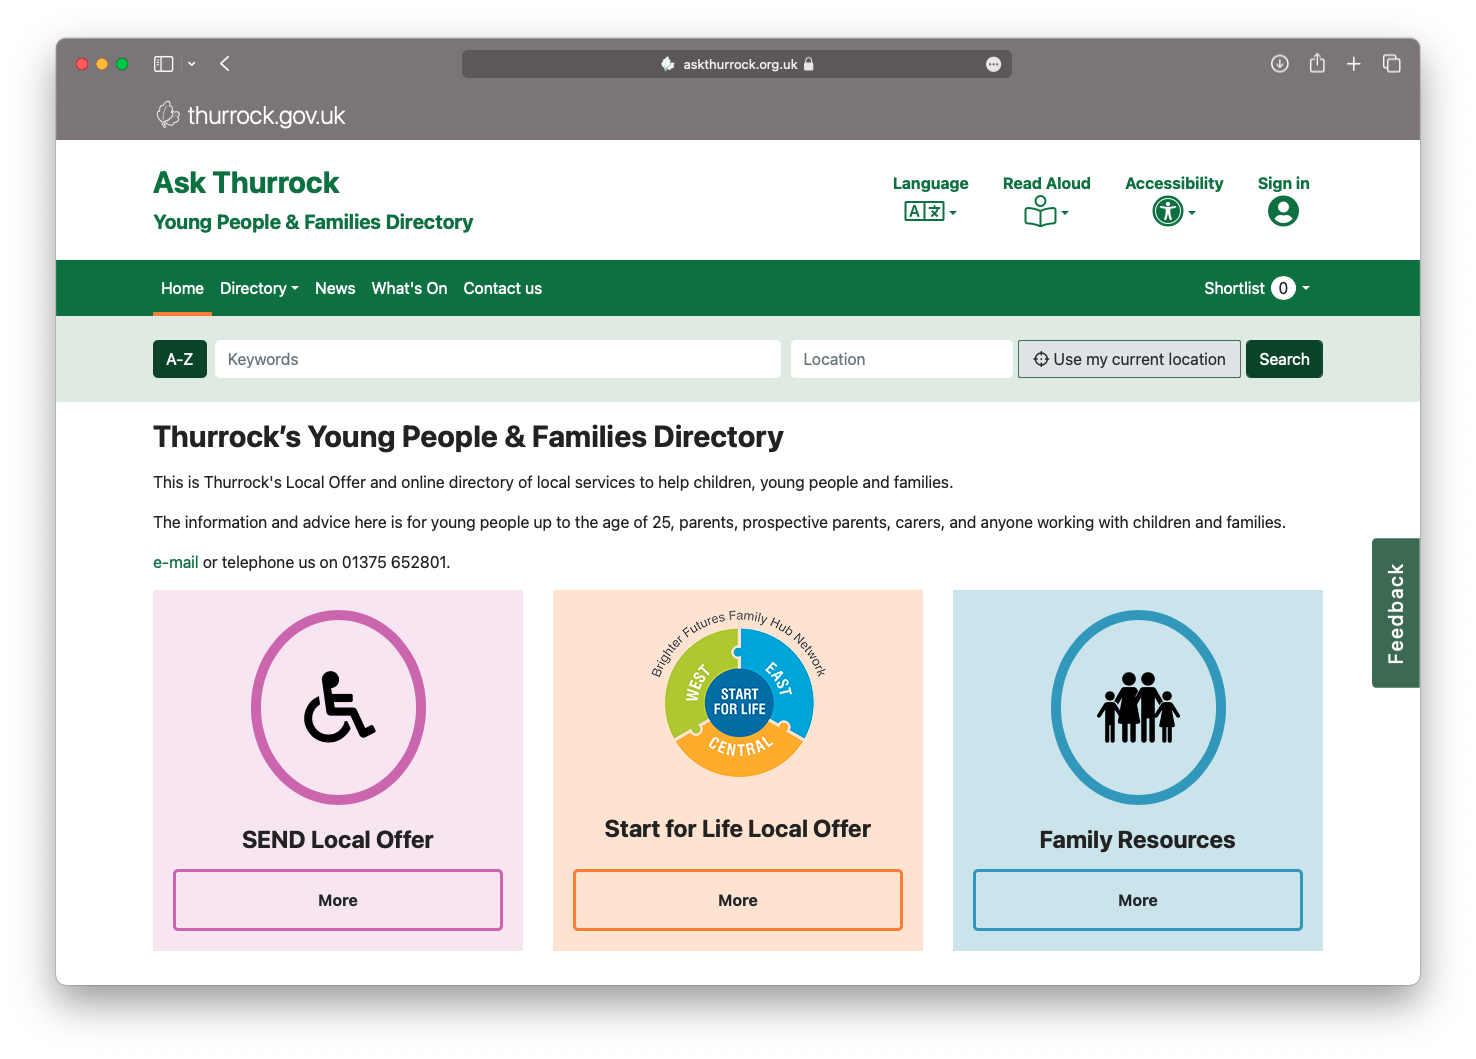 Thurrock’s Young People & Families Directory homepage